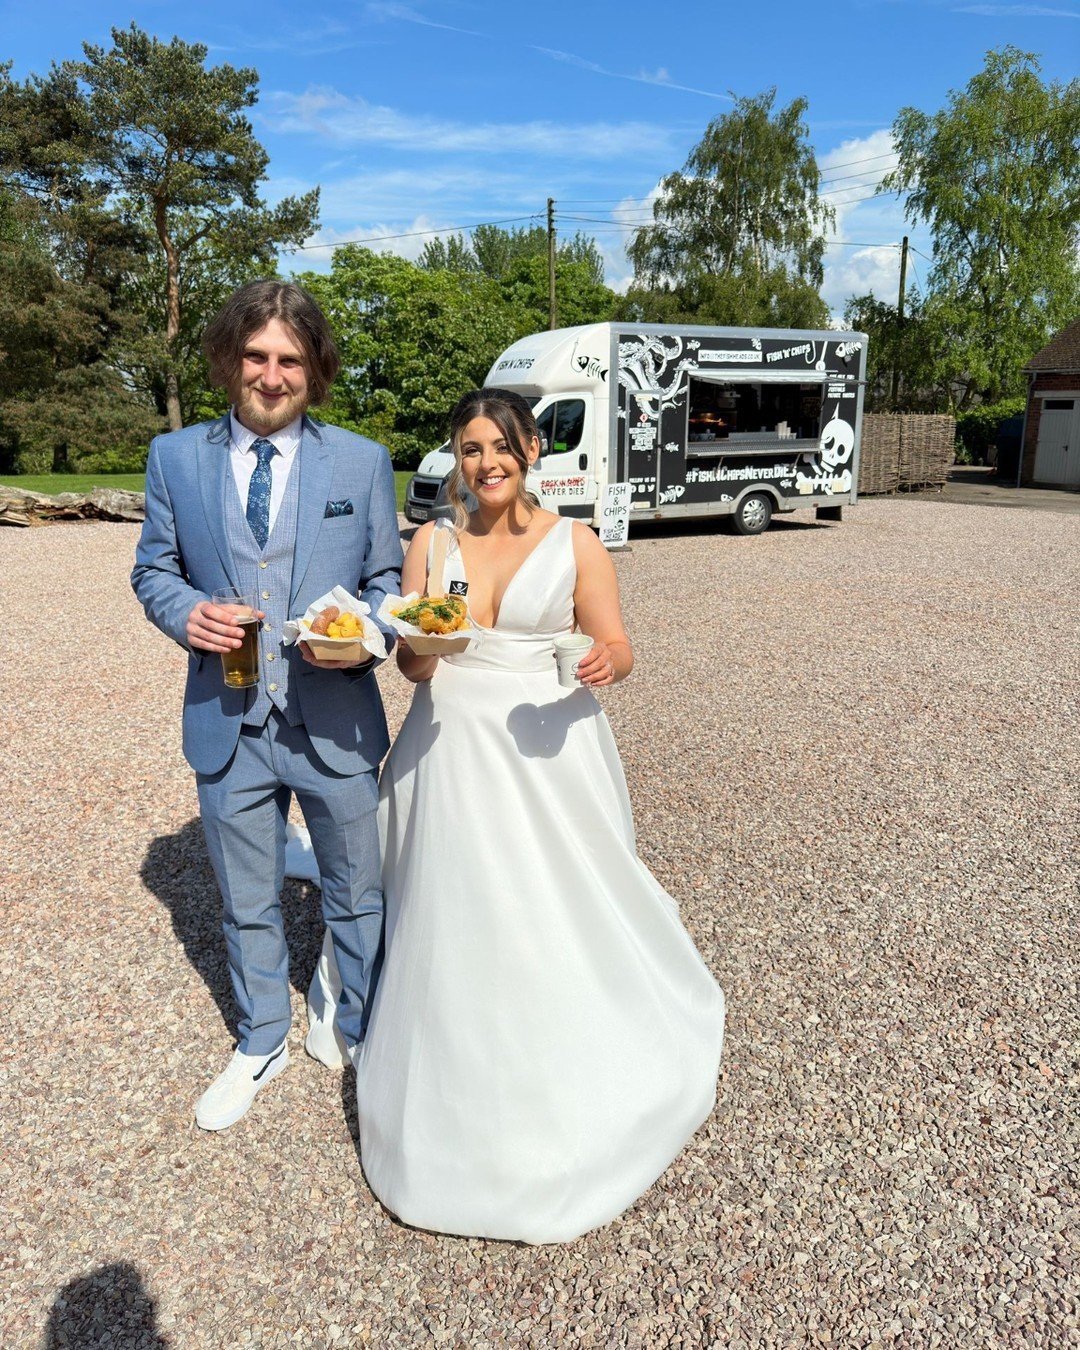 Congratulations Mr &amp; Mrs Skelly. 💍

Another beautiful Fish Heads wedding! Dm us for more information on how we could be a part of your big day. 

#FishHeads #WeddingFoodTruck #Shropshire #WeddingFood